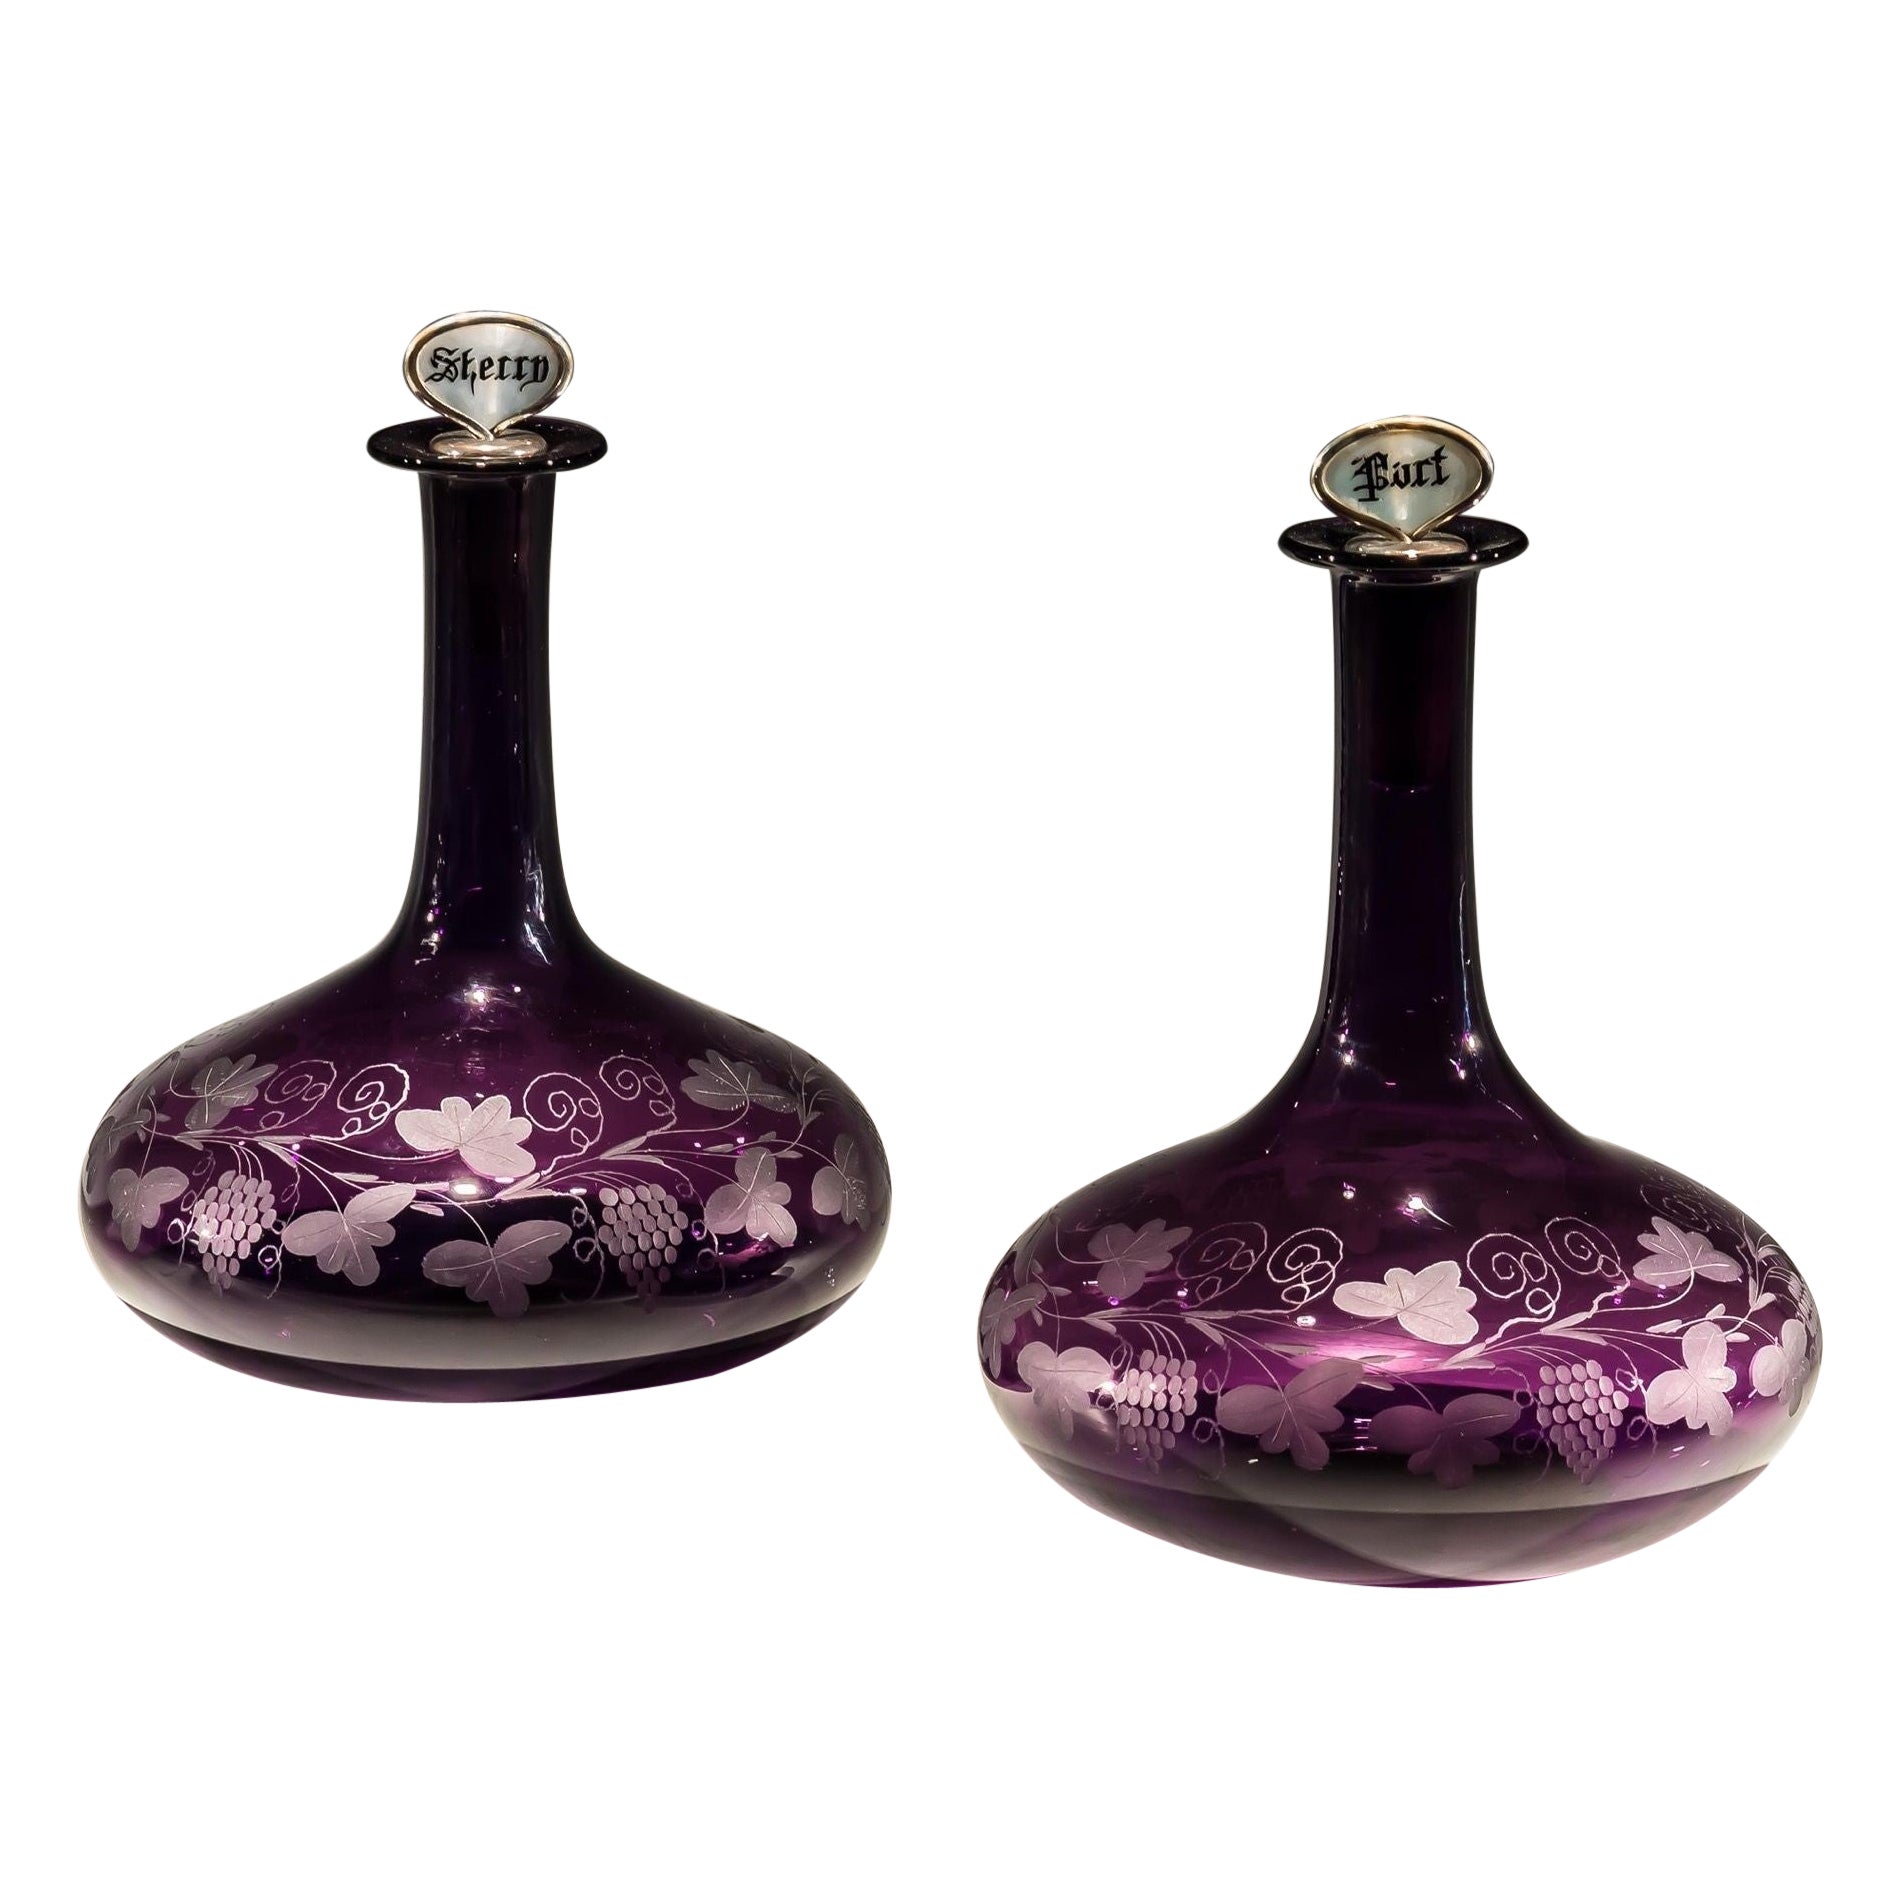 A Fine Pair Amethyst Port & Sherry Decanters